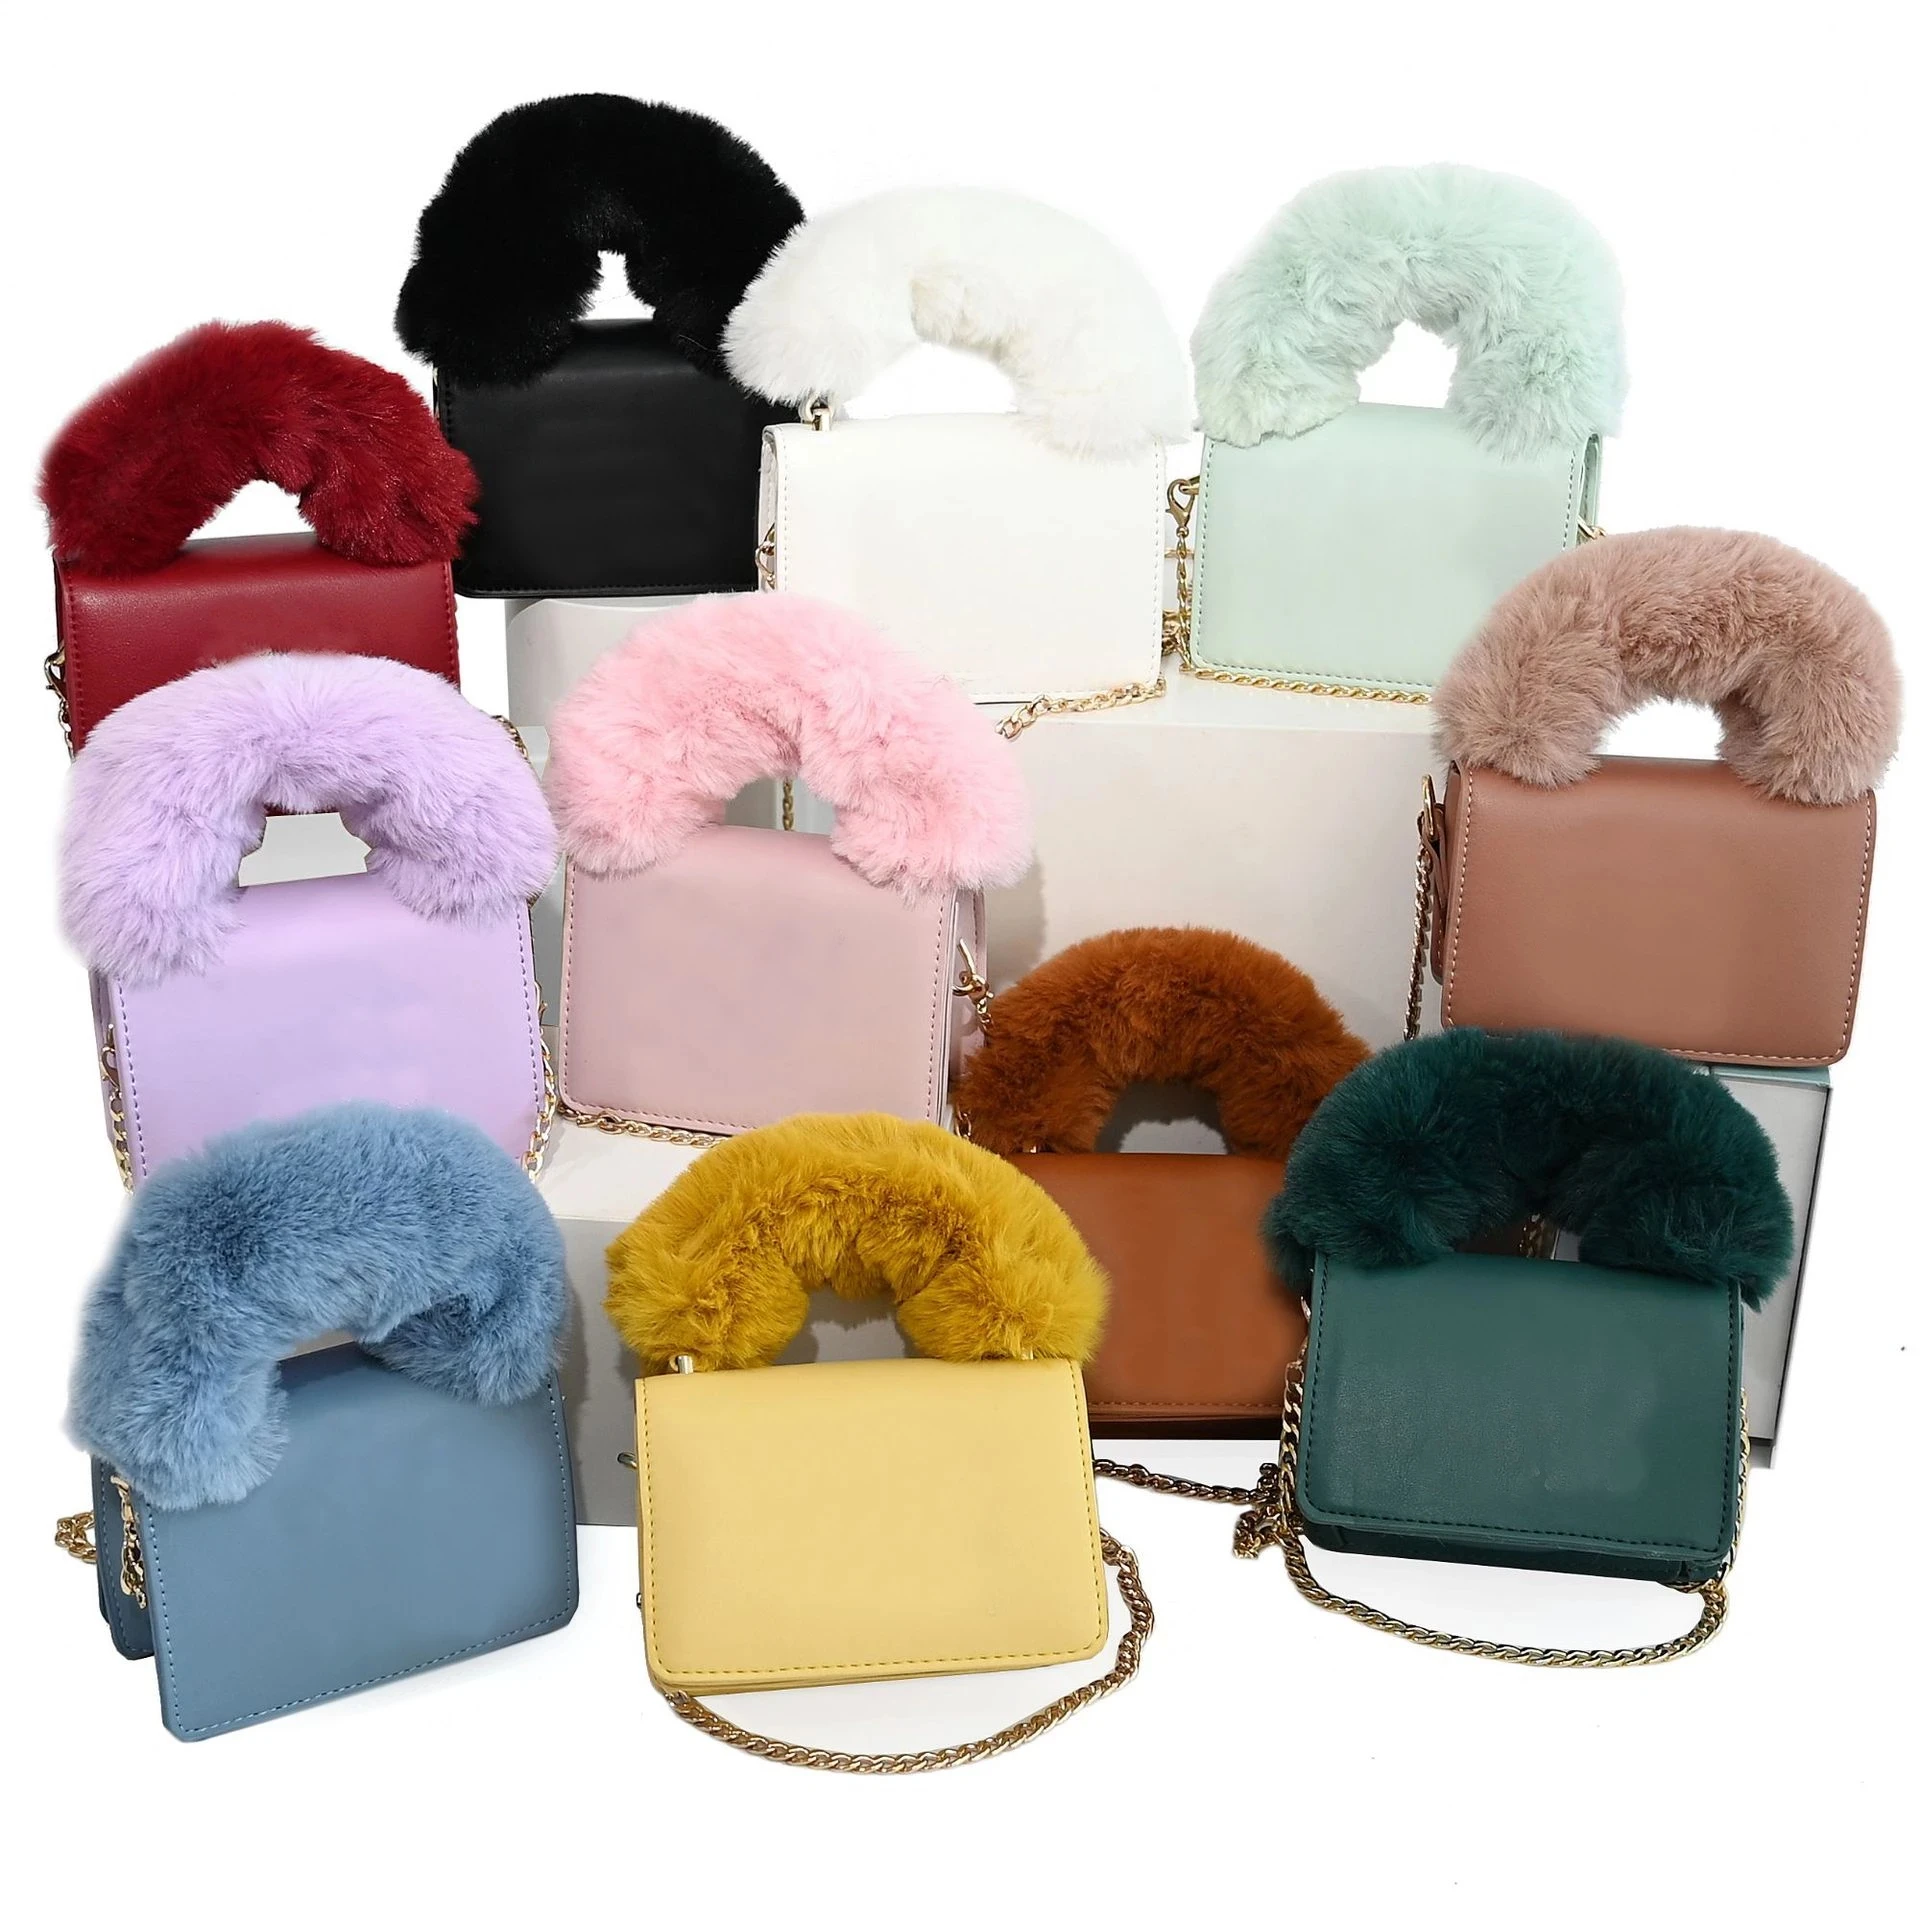 

2021 Luxury fashion famous designer brands handbags for women matching NY fur hat and purses NY bag hats set, 4colors